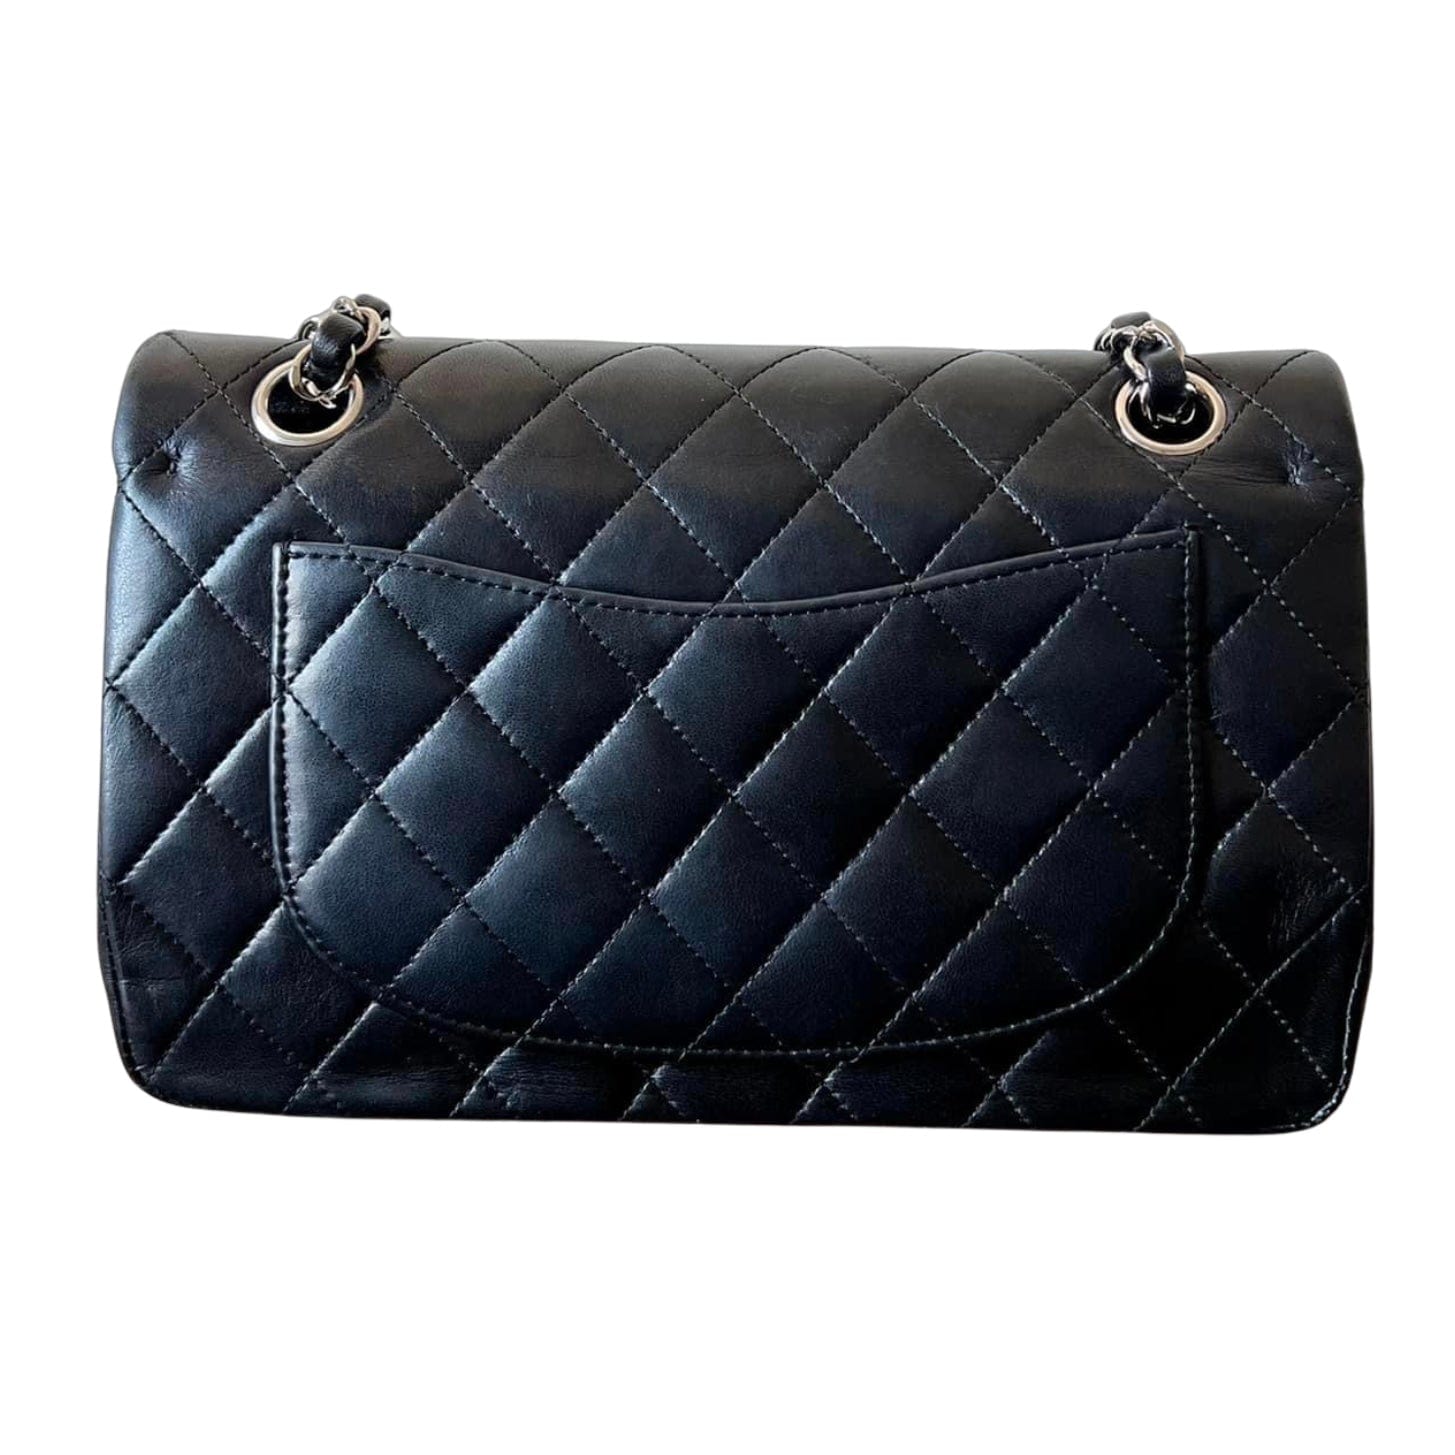 Vintage Chanel Classic Flap - 273 For Sale on 1stDibs